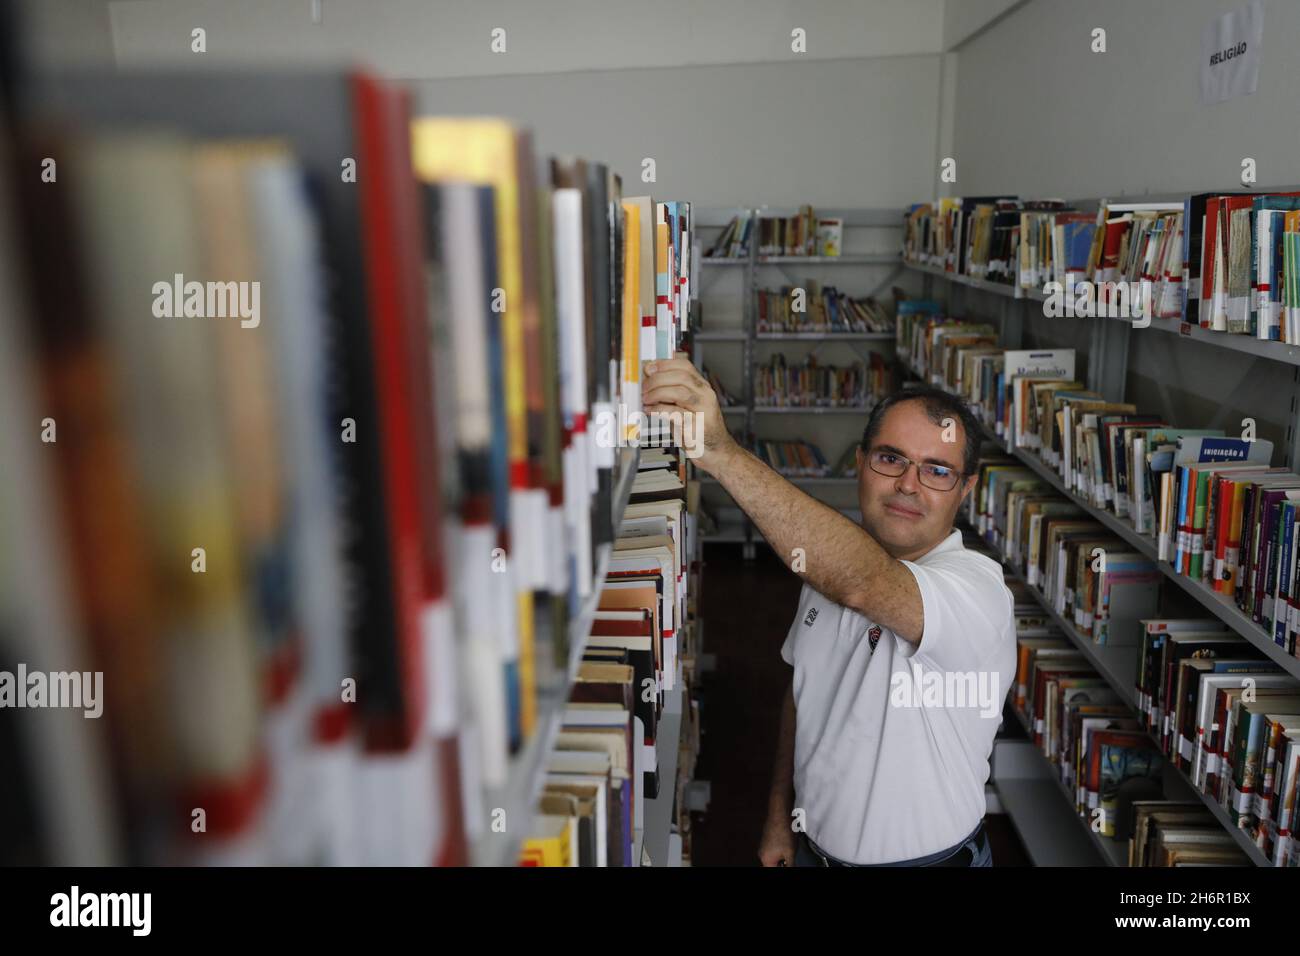 alagoinha, bahia, brazil - july 3, 2019: person is seen picking up a book from a shelf of a public library in the city of Alagoinhas. Stock Photo